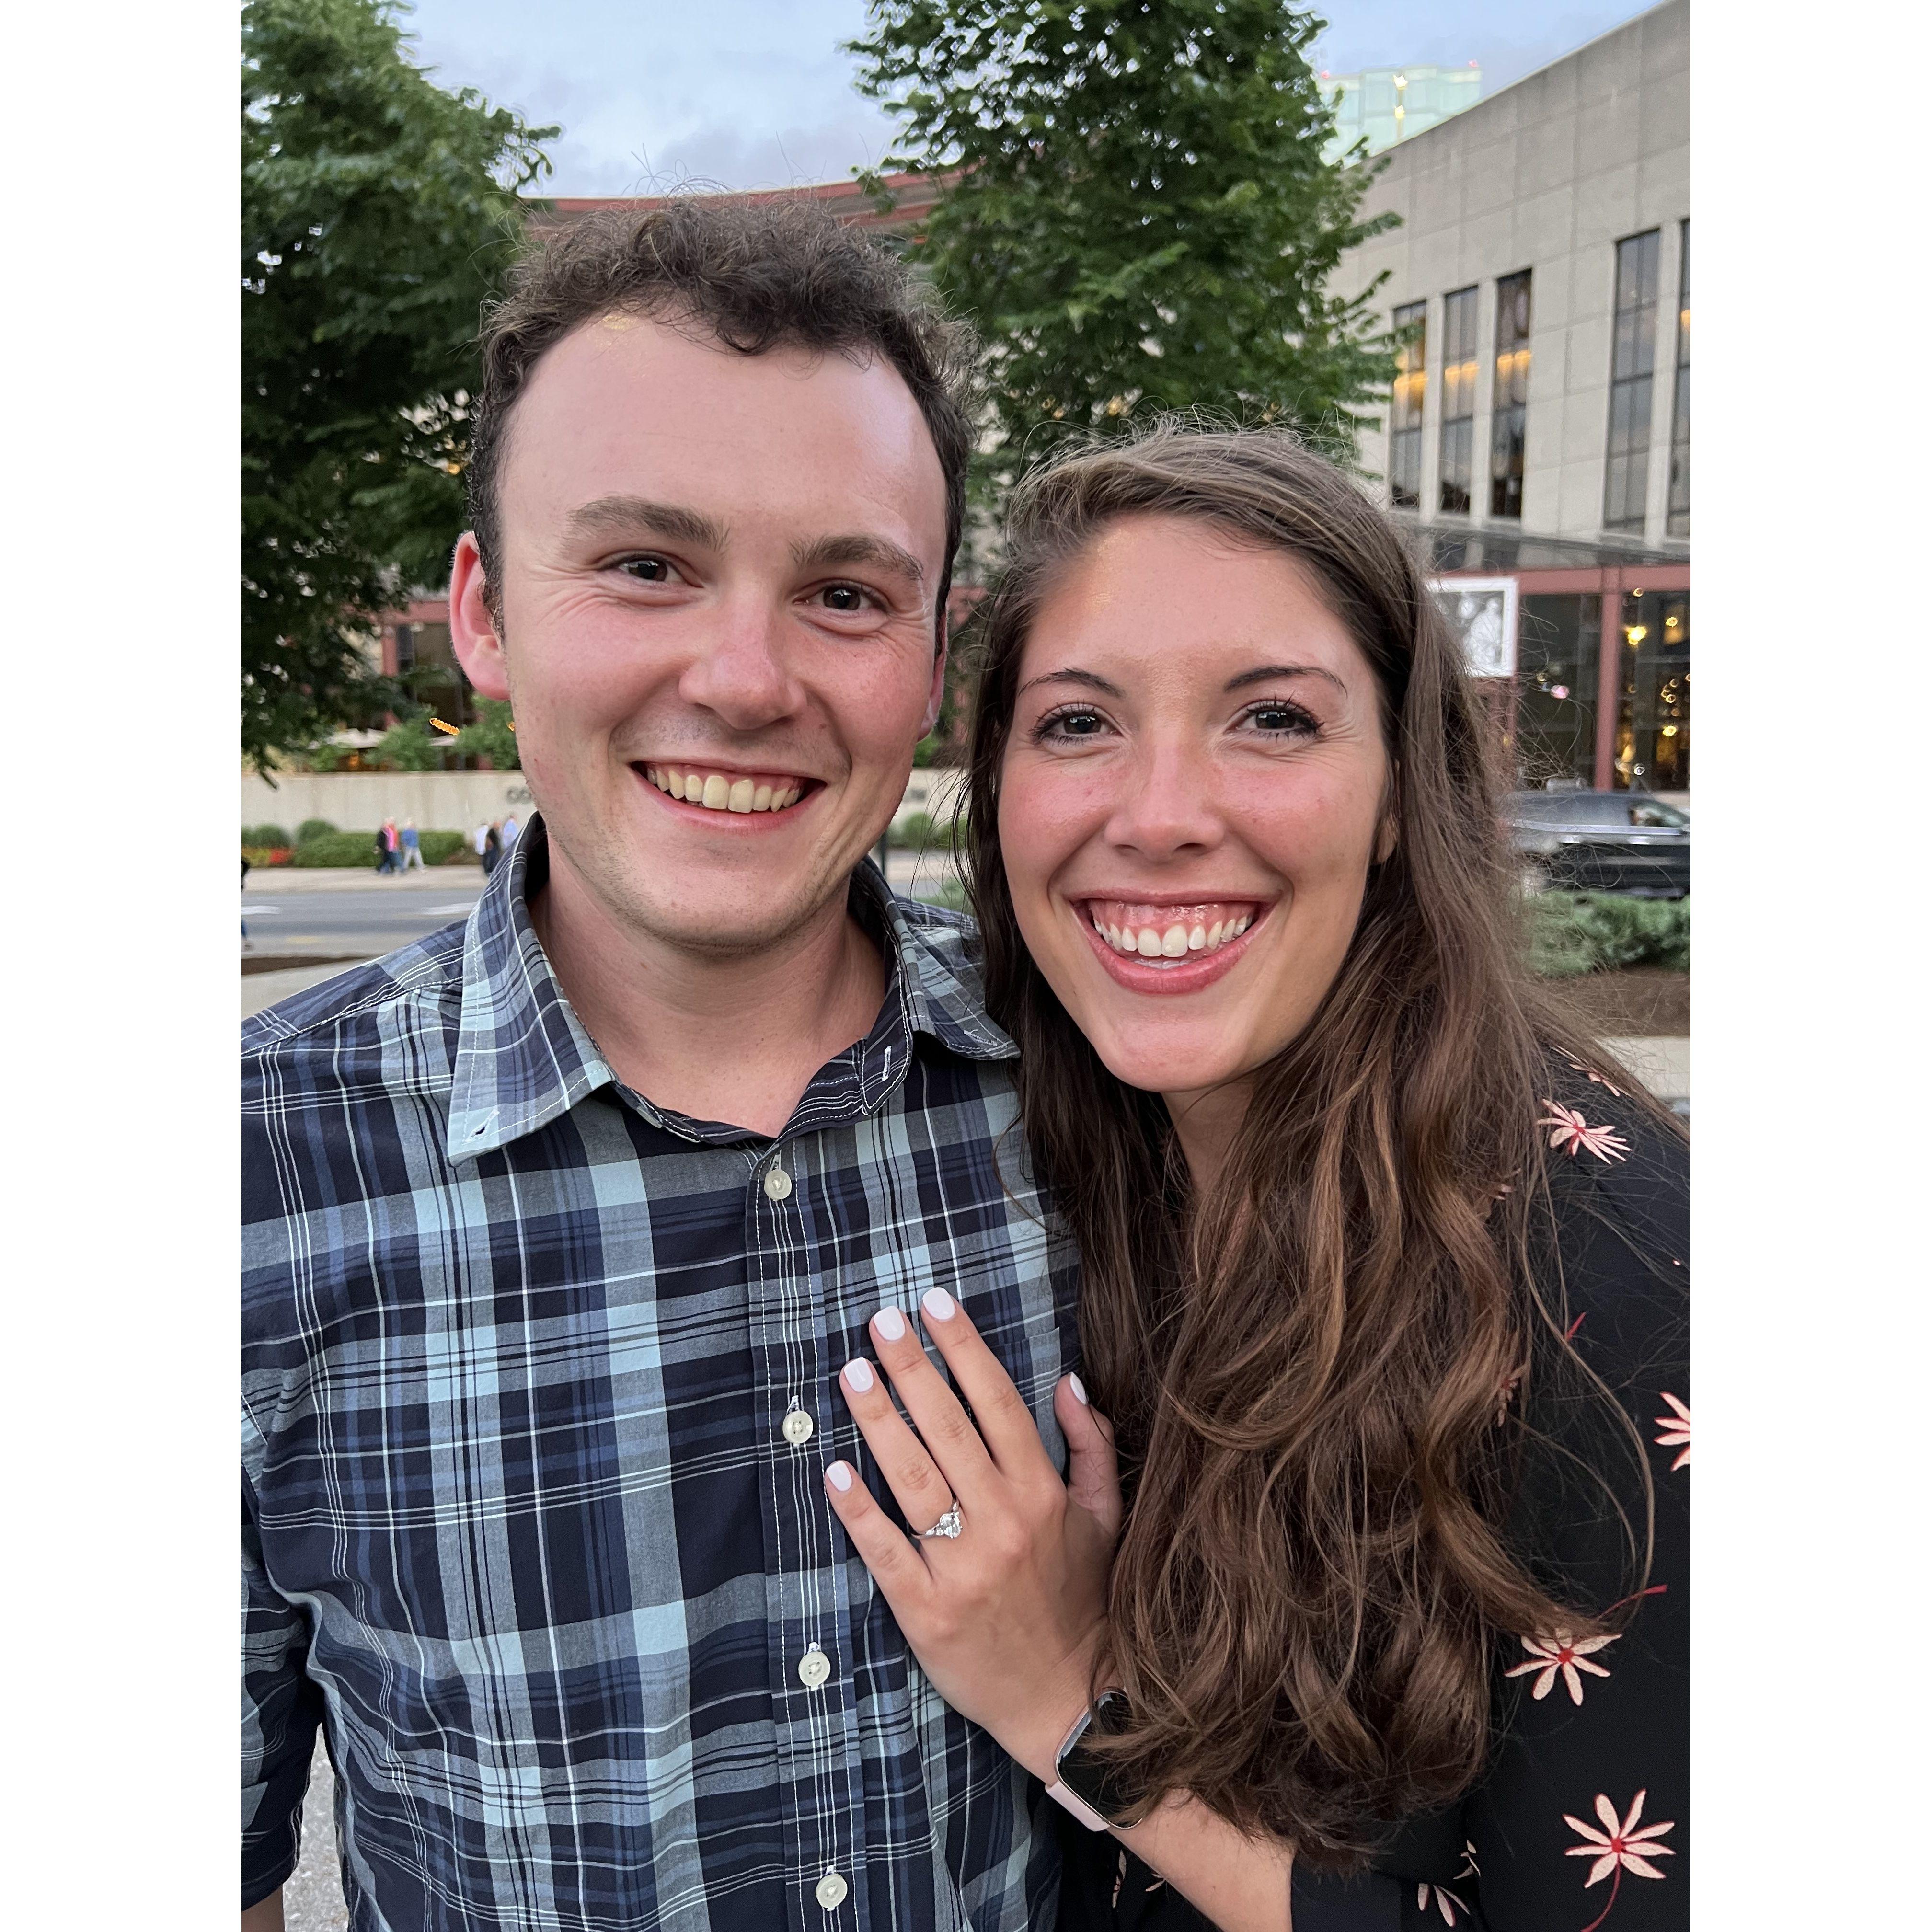 Kyle proposed in front of the Music City Hall of Fame Nashville, TN on May 27th, 2022 while Kaitlyn was finishing her last rotation for school.